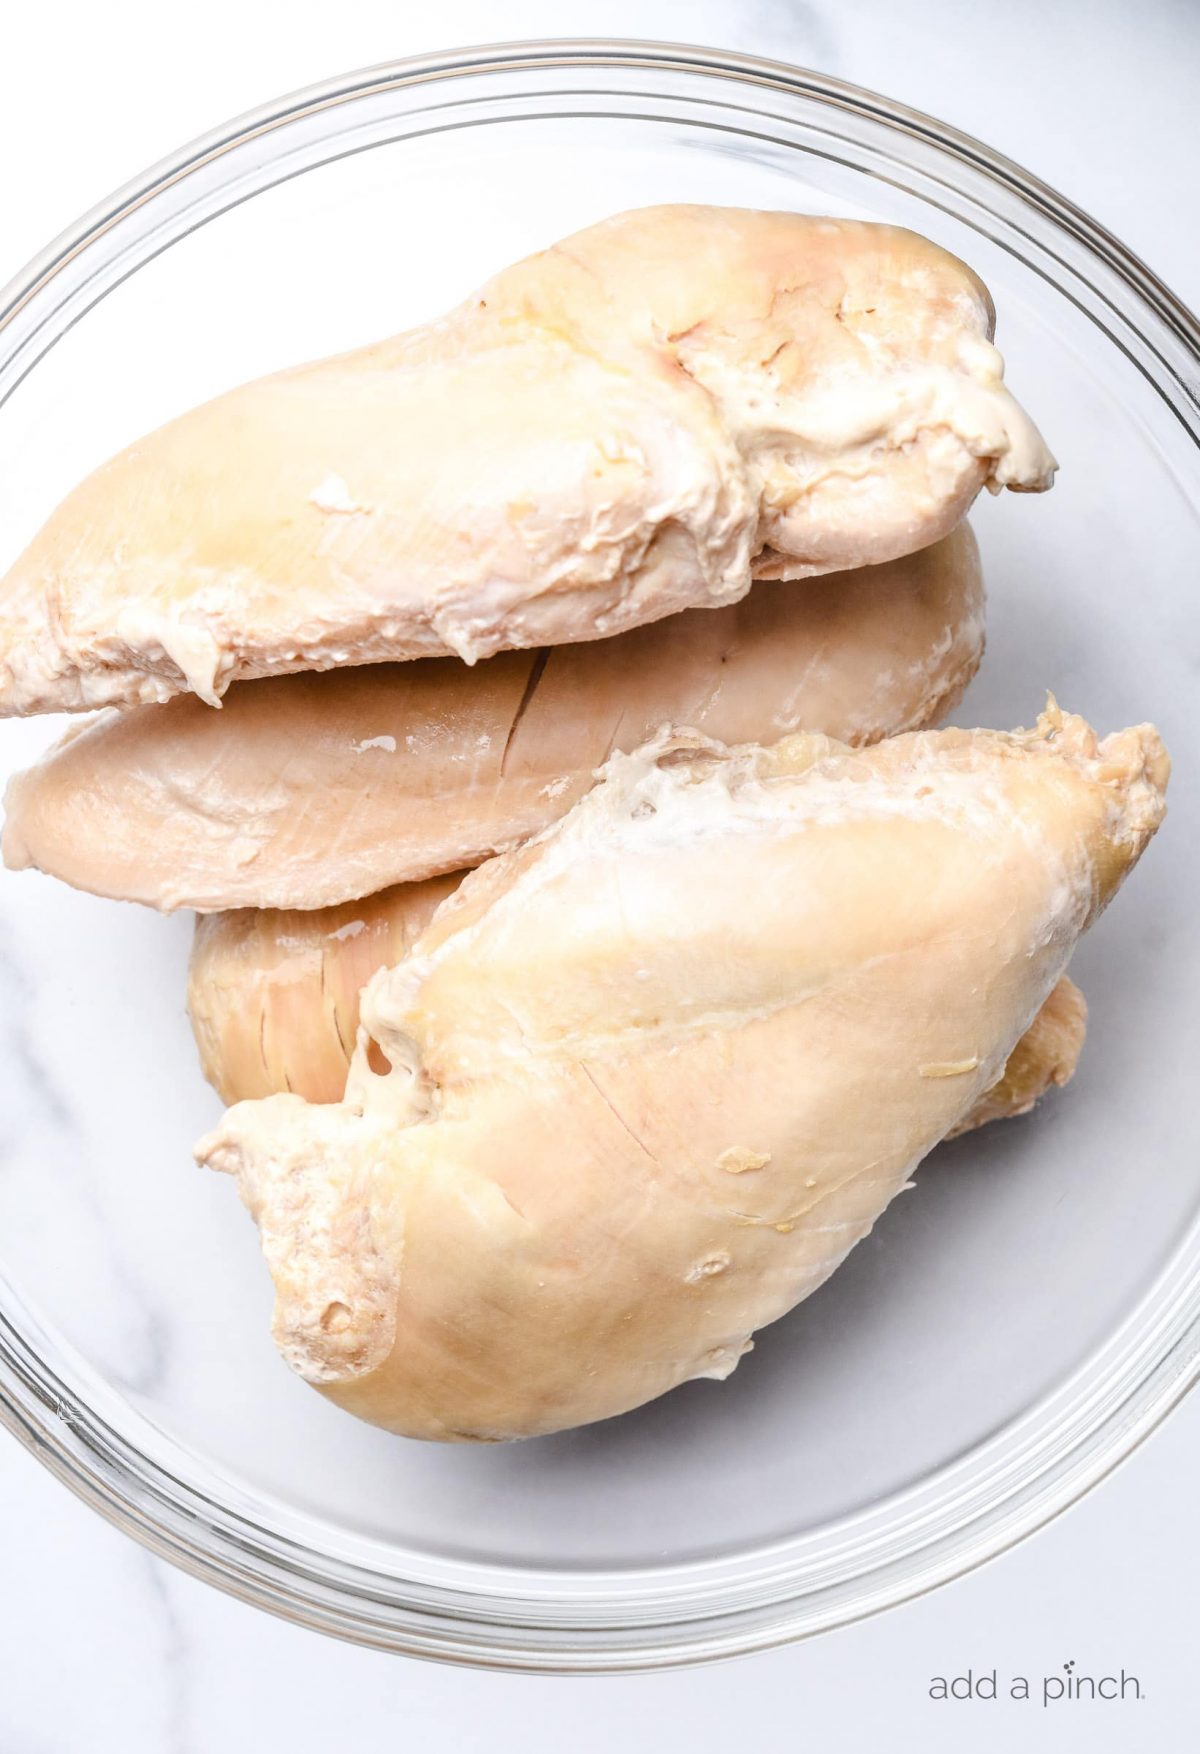 Four cooked chicken breasts in a clear glass bowl on a white marble surface.